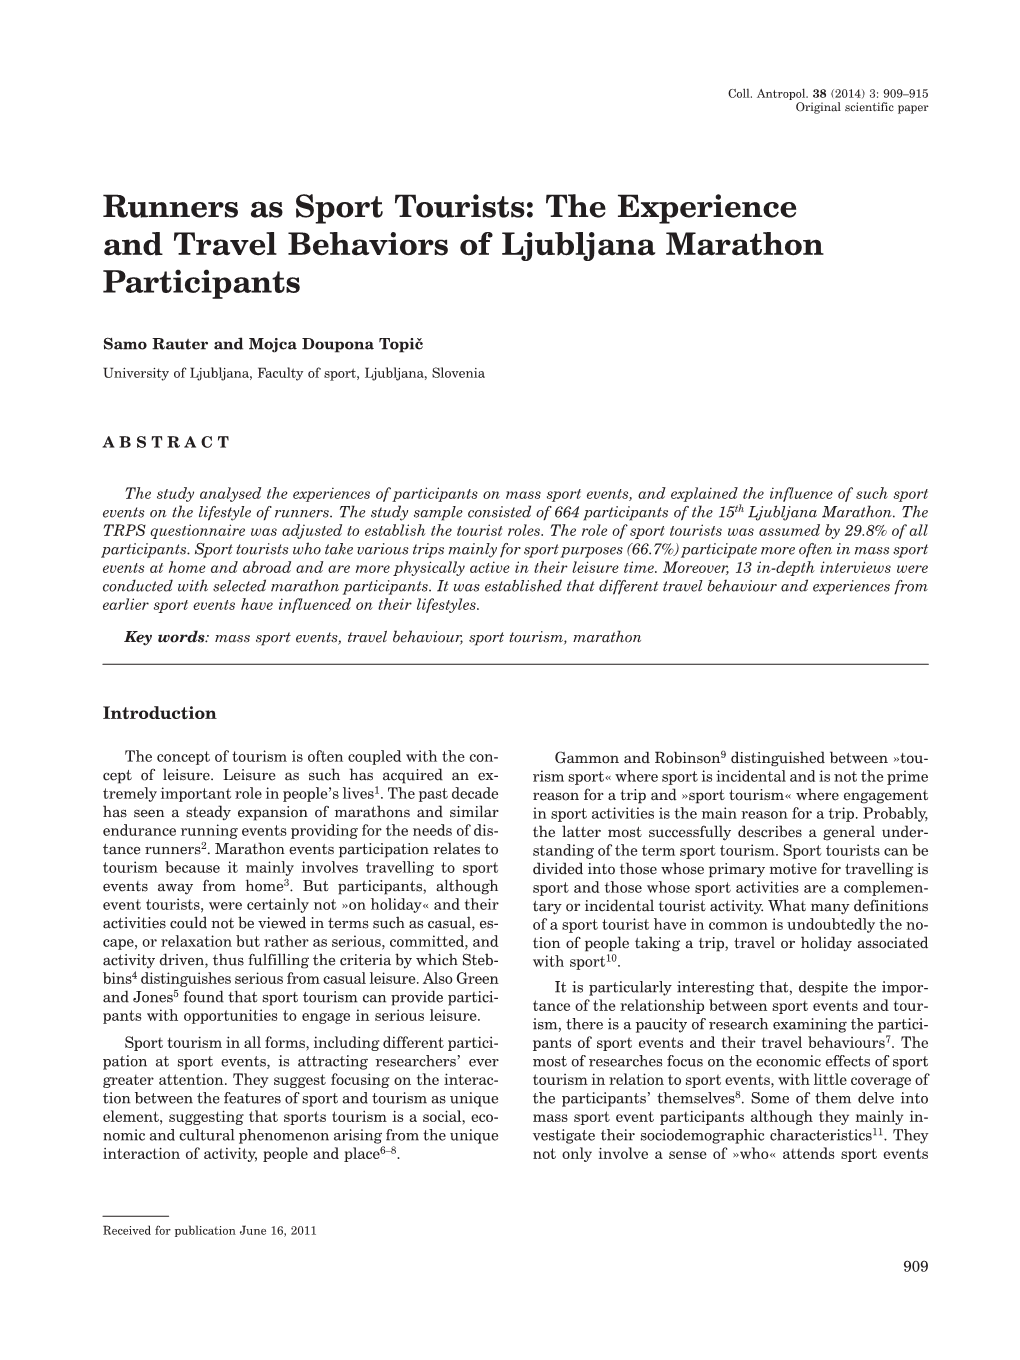 Runners As Sport Tourists: the Experience and Travel Behaviors of Ljubljana Marathon Participants